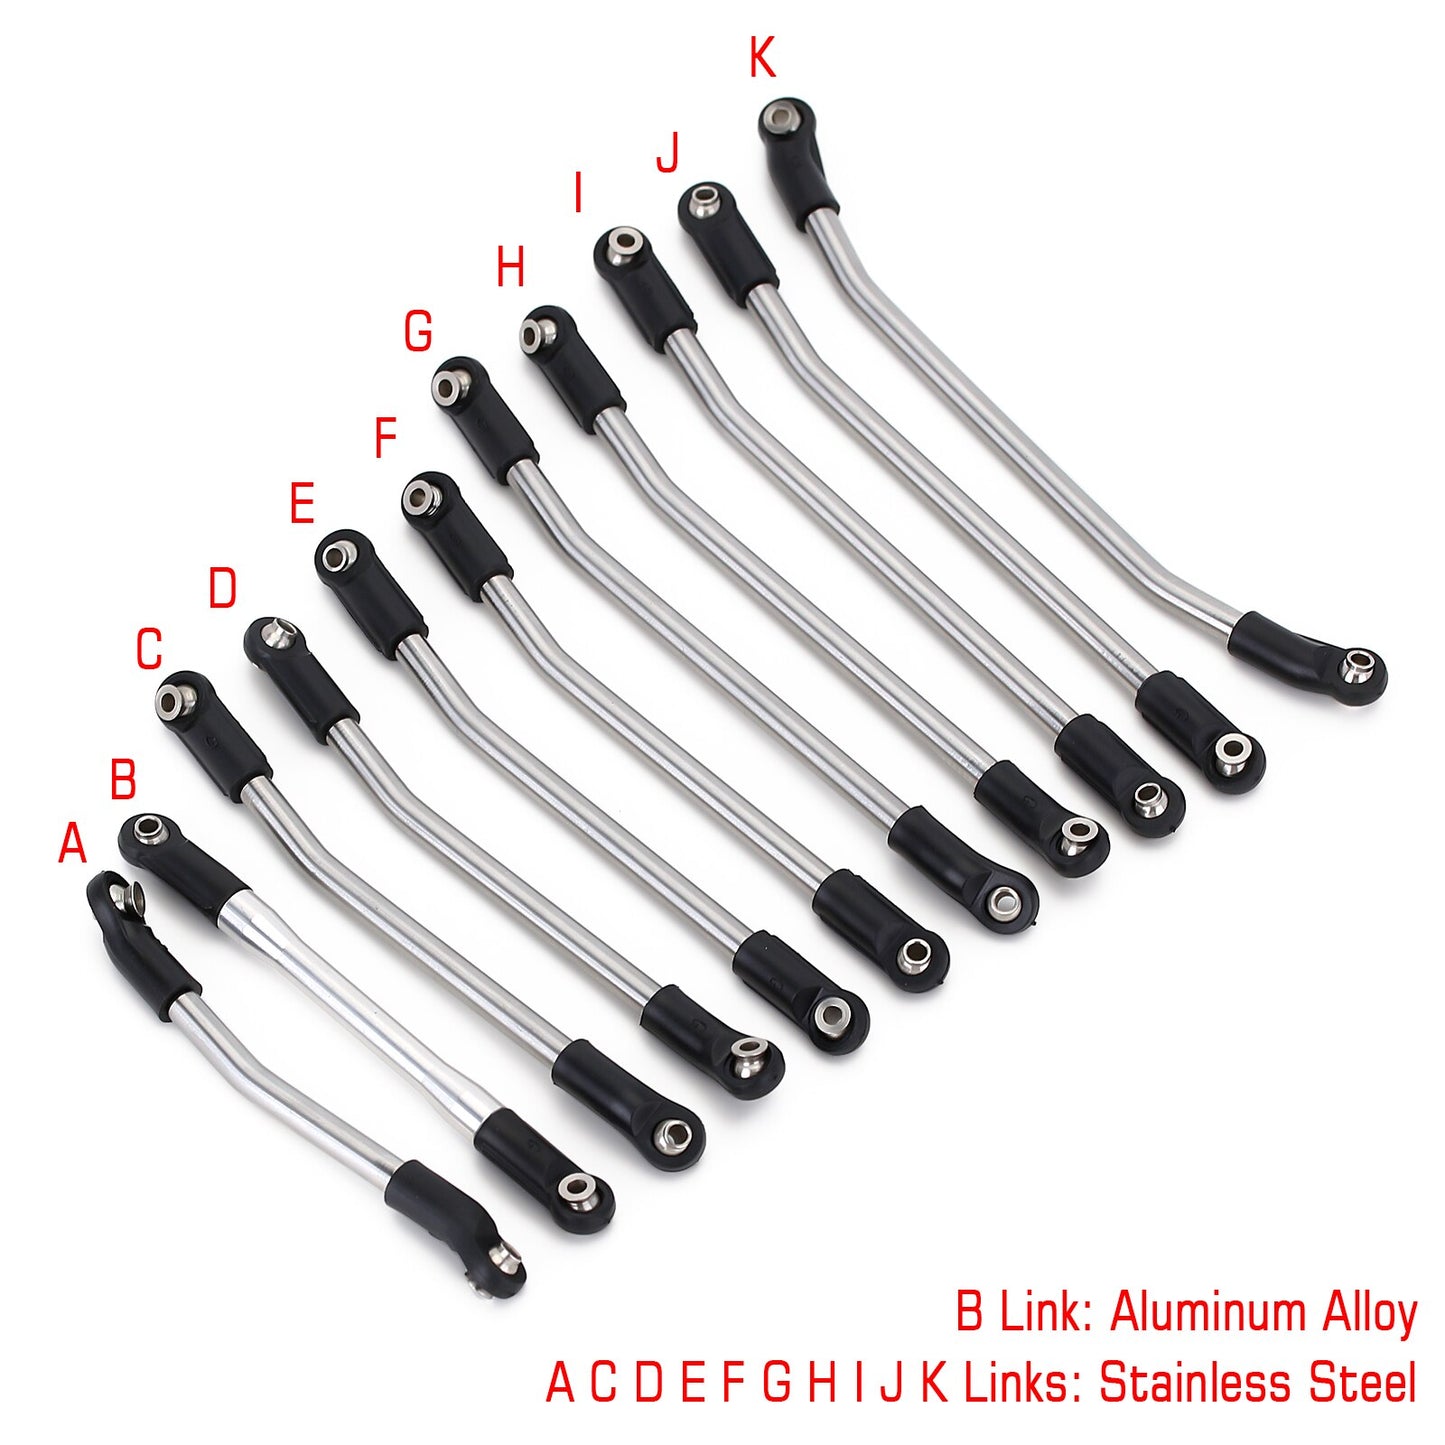 INJORA 11Pcs 313mm Wheelbase Metal Chassis Links Rod End Set for 1/10 RC Crawler Car Axial SCX10 II 90046 Upgrade Parts